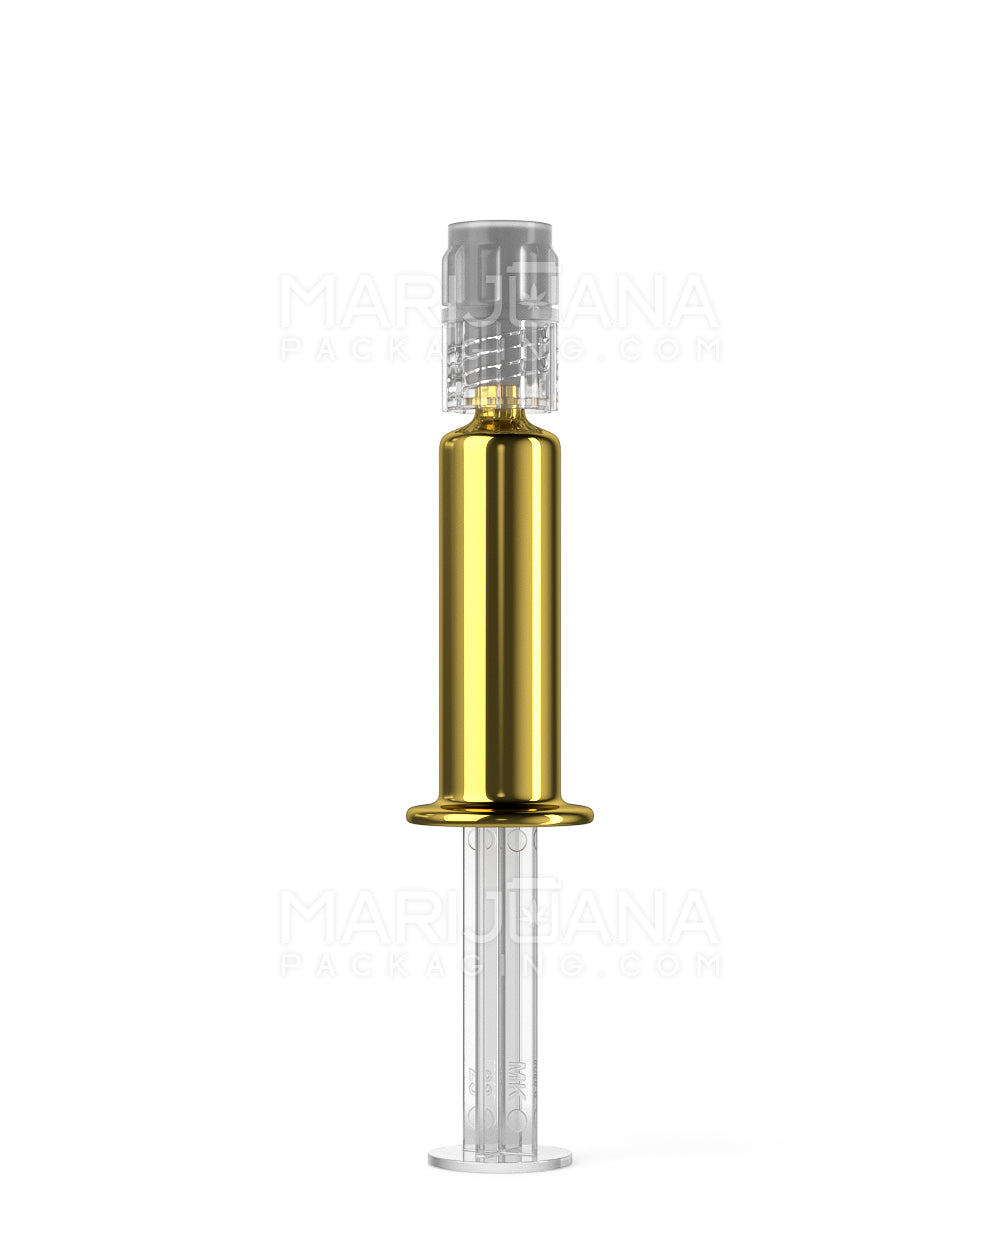 Luer Lock | Gold Glass Dab Applicator Syringes | 1mL - No Measurements - 100 Count - 1